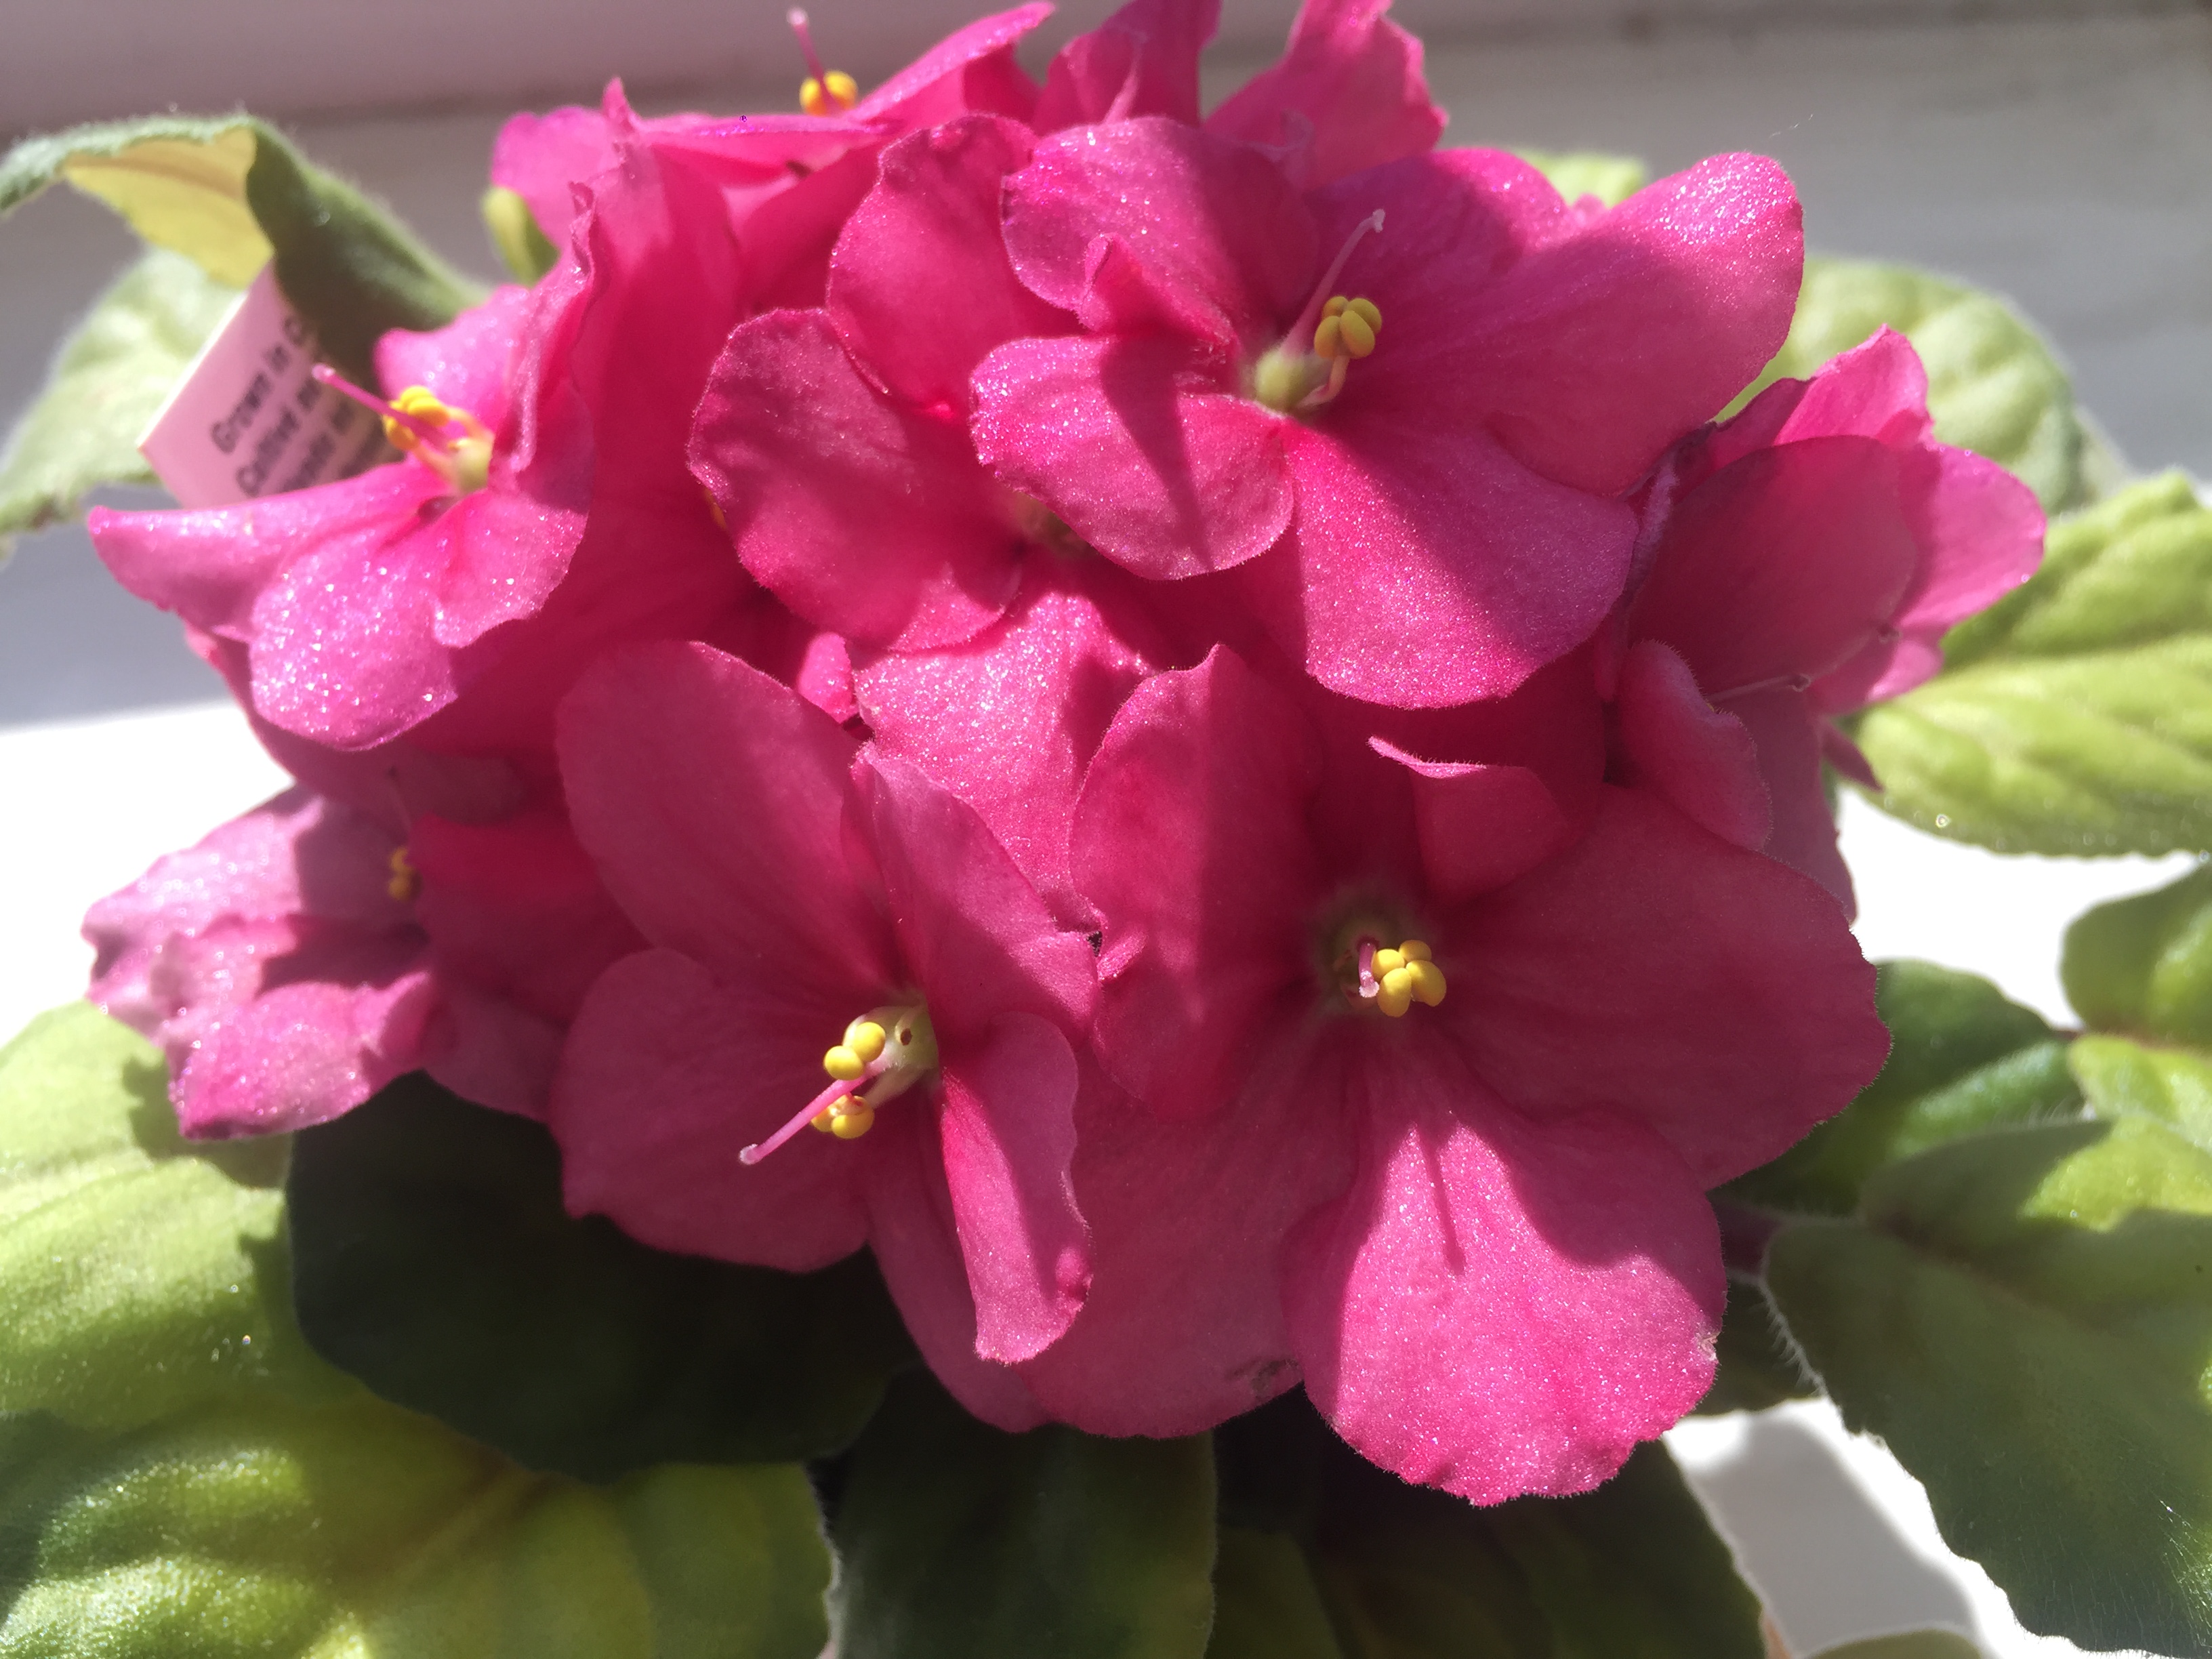 Espoma | Plant African Violets for a Pop of Color | Espoma